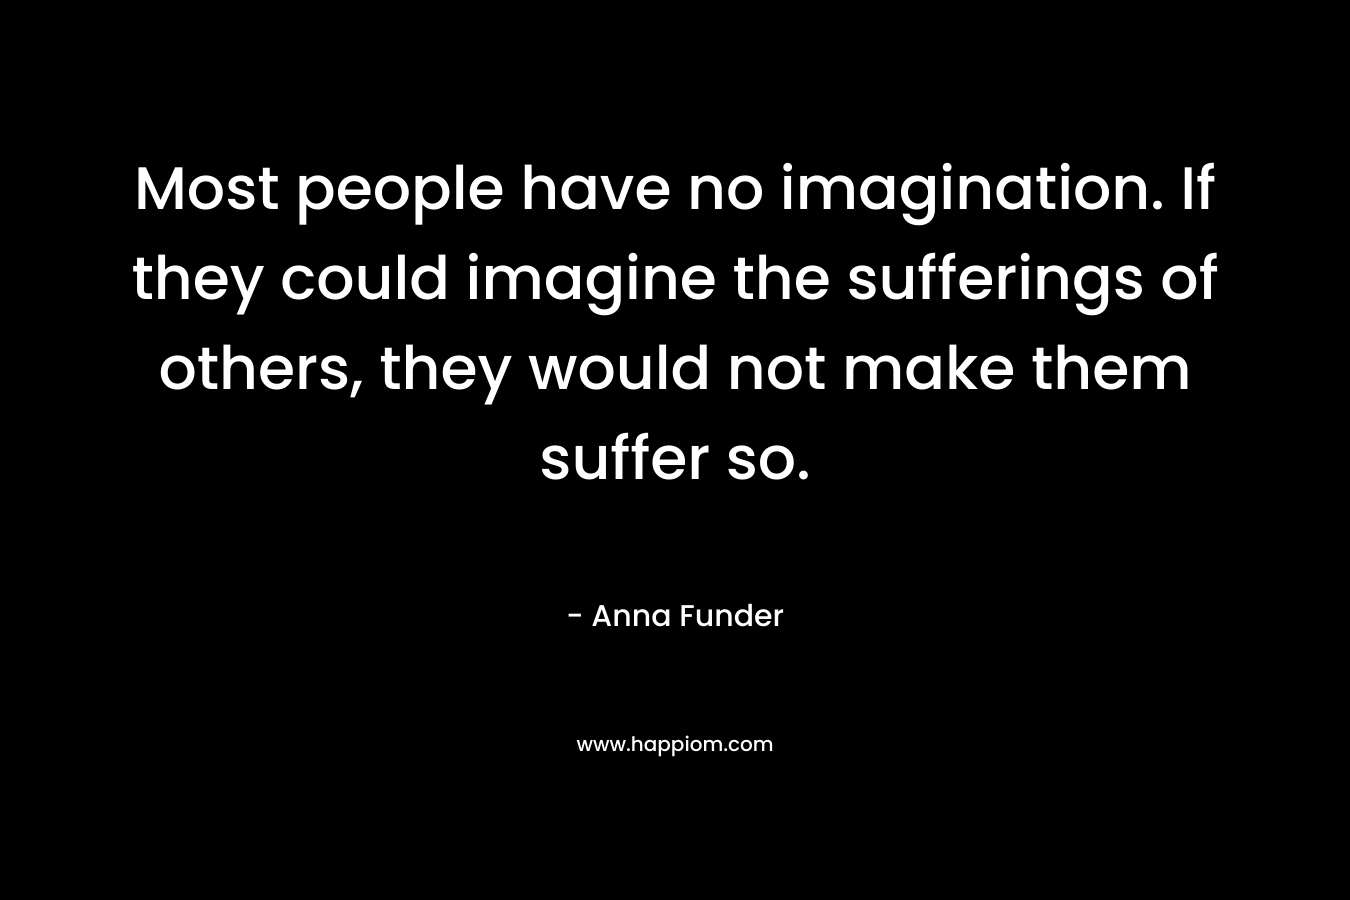 Most people have no imagination. If they could imagine the sufferings of others, they would not make them suffer so. – Anna Funder